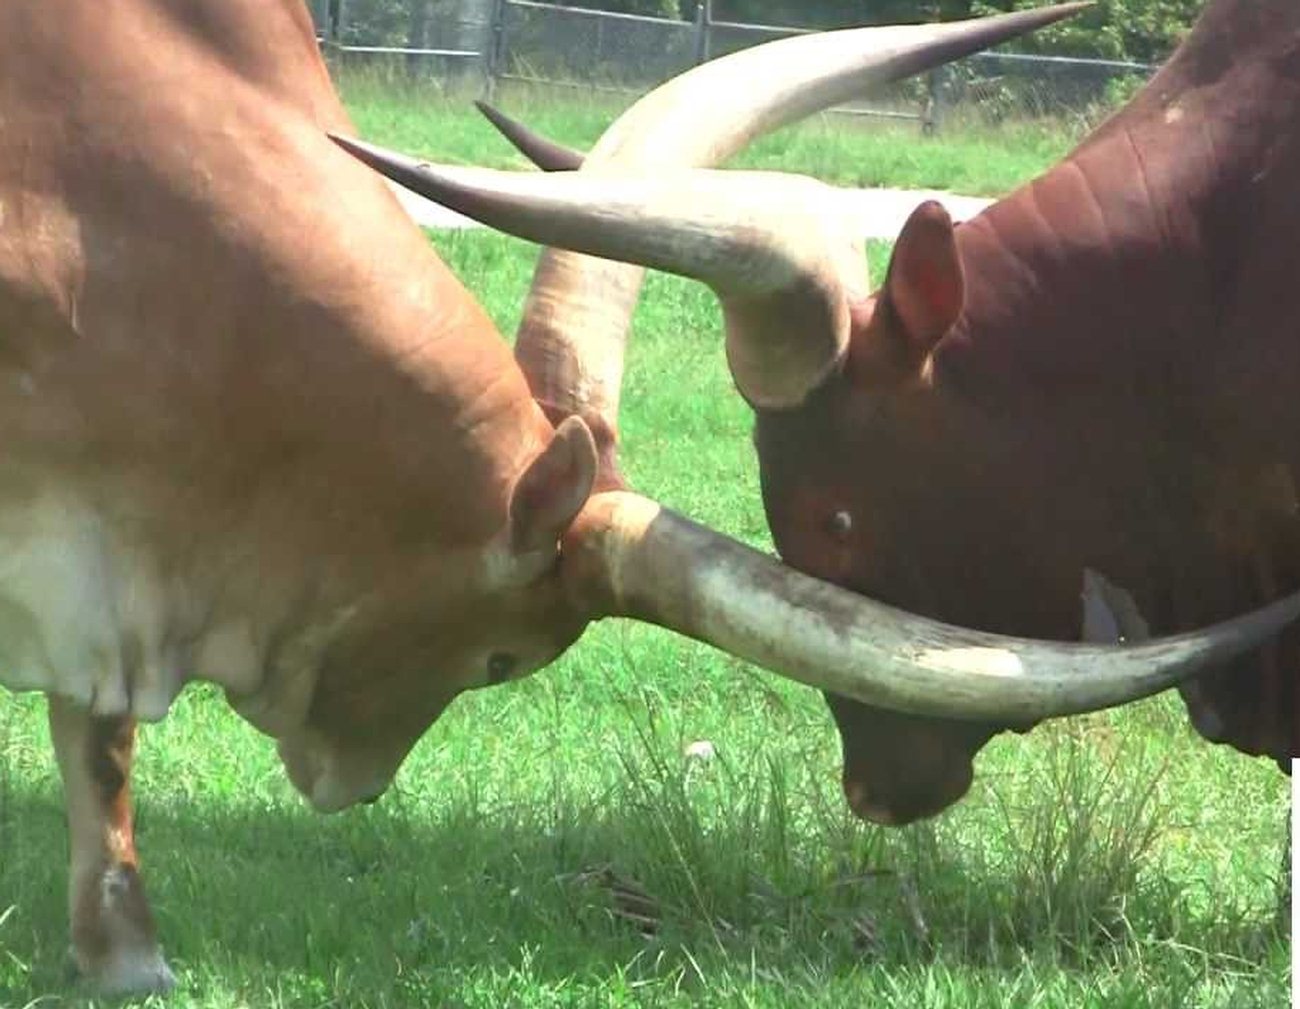 Two Bulls With Huge Horns Sparring